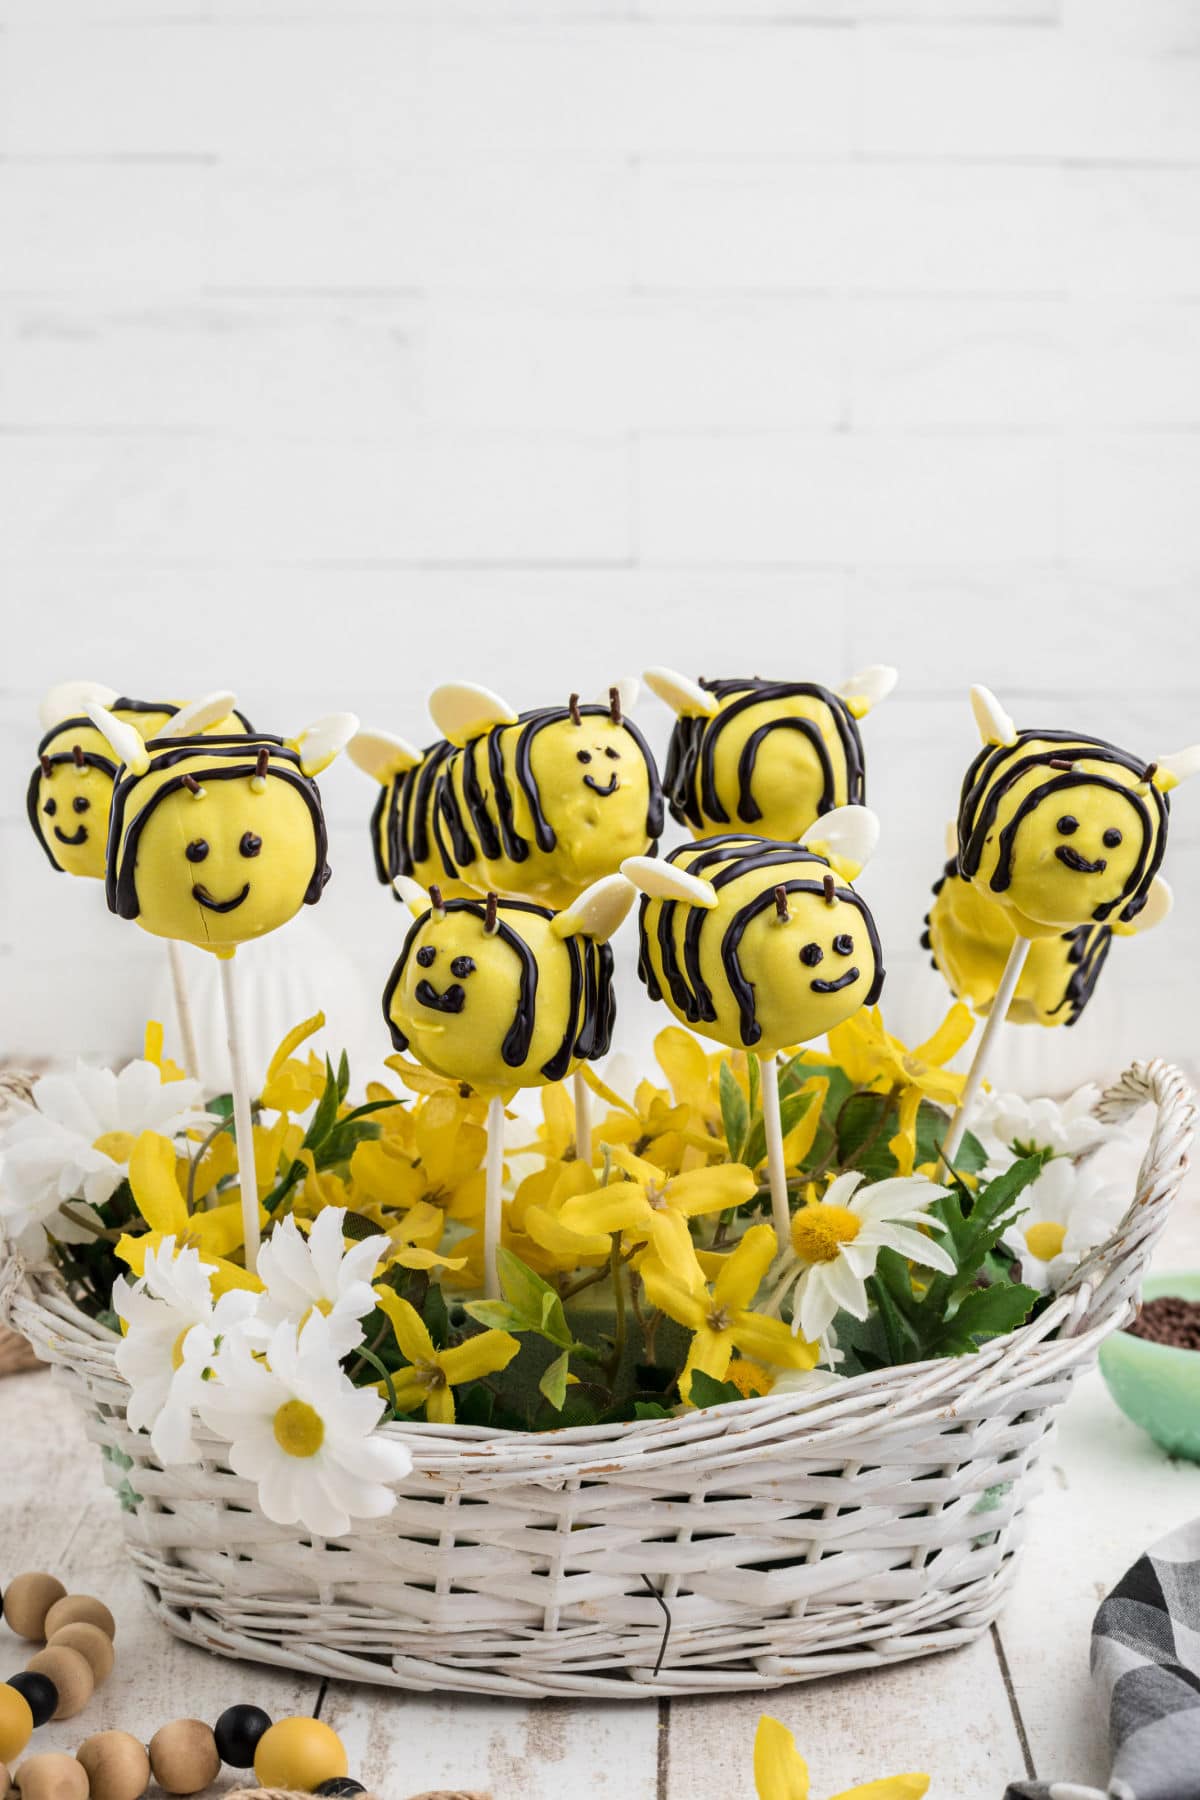 Bumble bee cake pops held upright by adding styrofoam toi a basket of flowers and pushing the sticks into it.